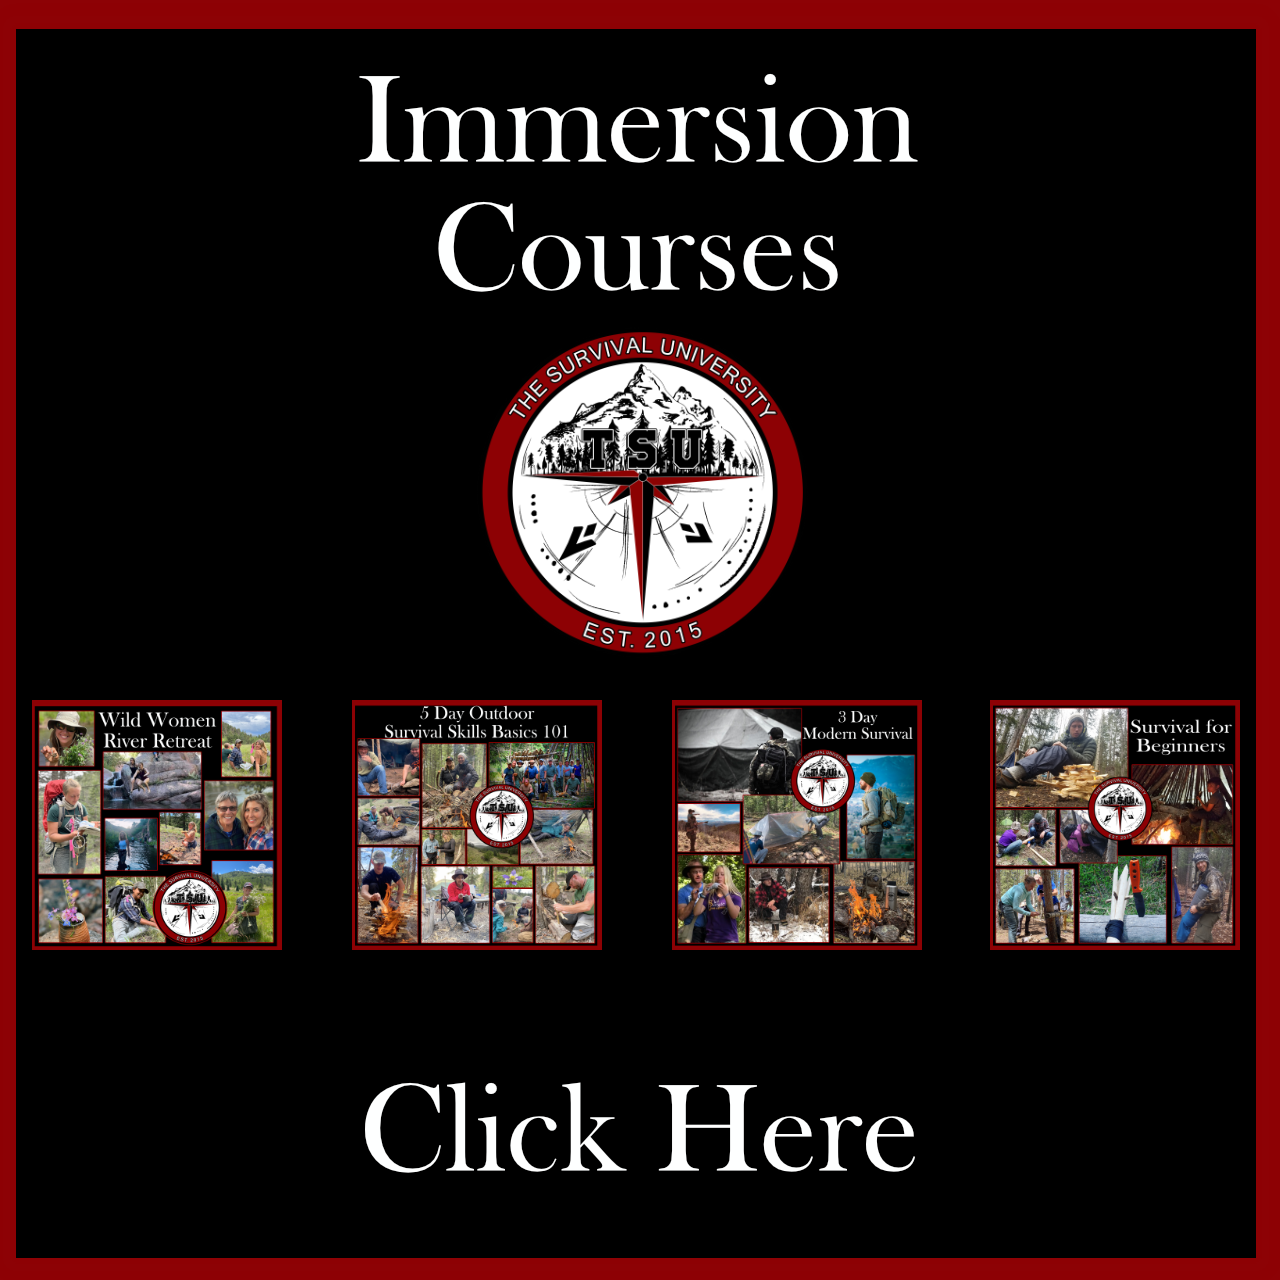 Immersion Courses